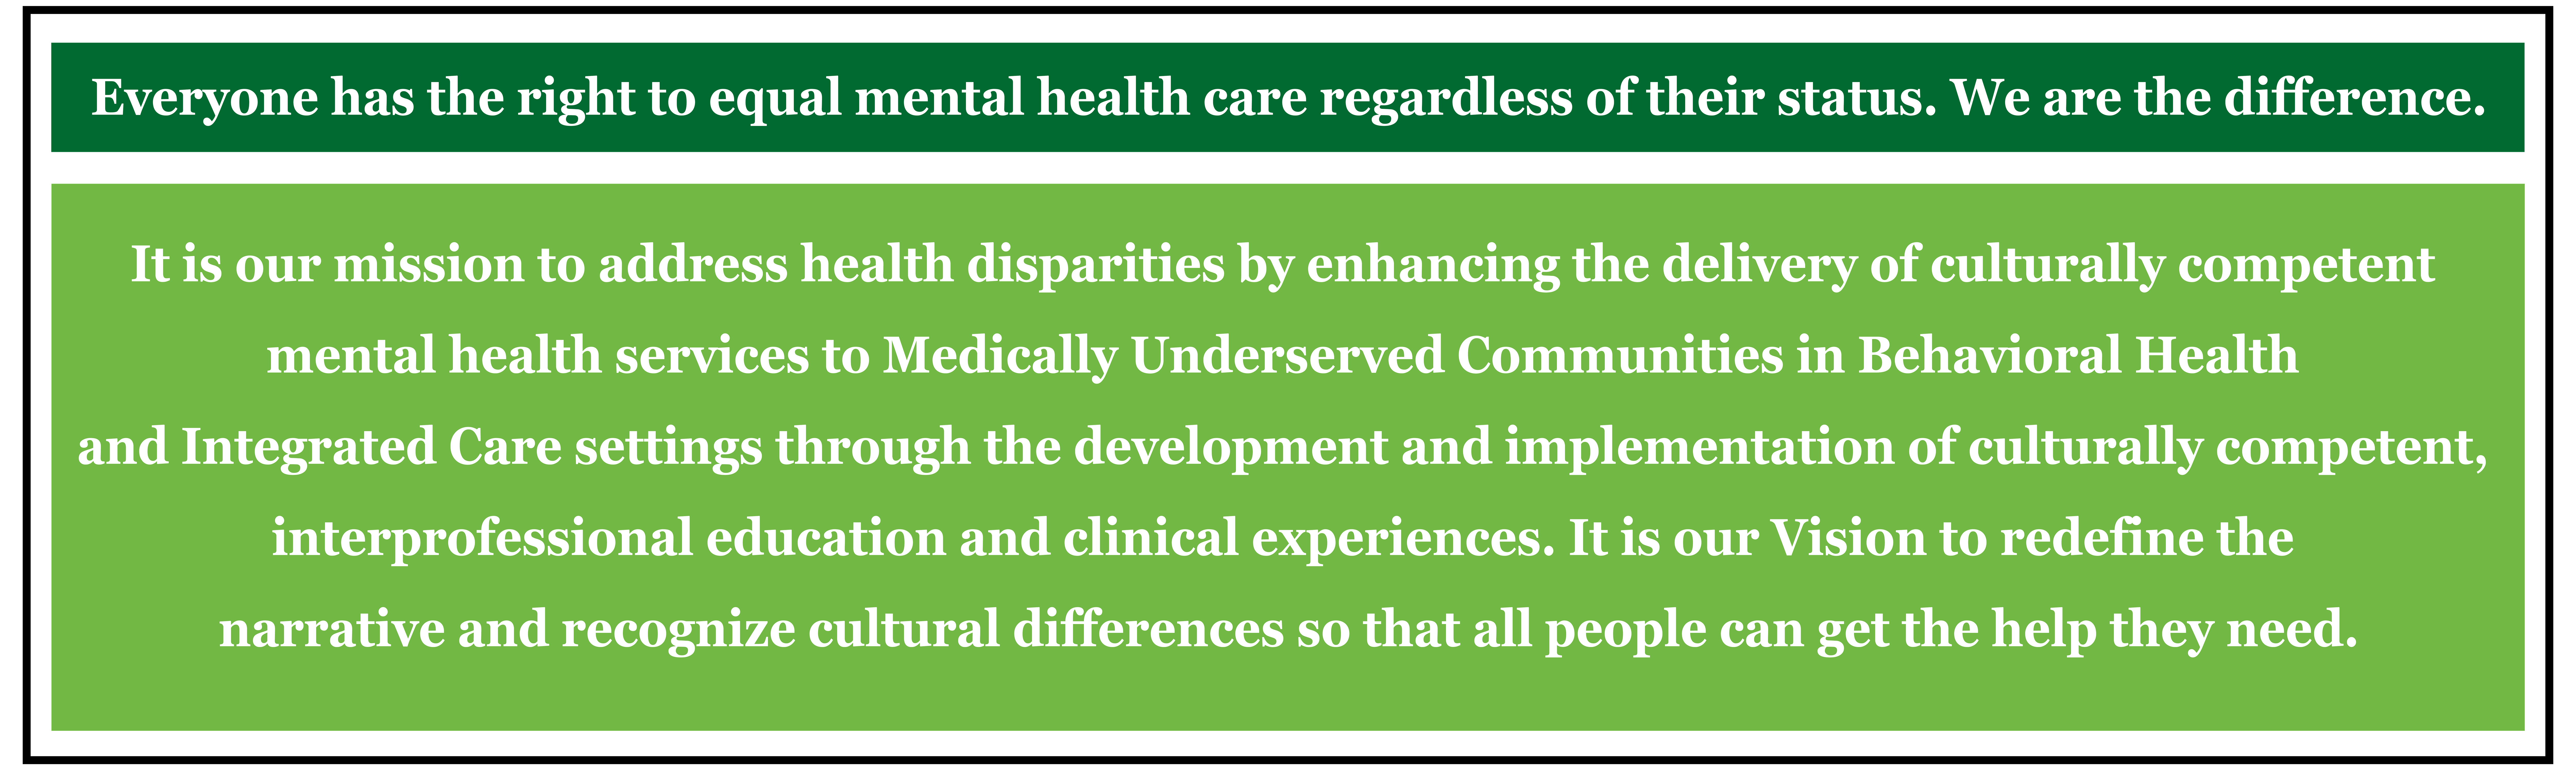 Everyone has the right to equal mental health care regardless of their status. We are the difference. It is our mission to address health disparities by enhancing the delivery of culturally competent  mental health services to Medically Underserved Communities in Behavioral Health  and Integrated Care settings through the development and implementation of culturally competent,  interprofessional education and clinical experiences. It is our Vision to redefine the  narrative and recognize cultural differences so that all people can get the help they need.